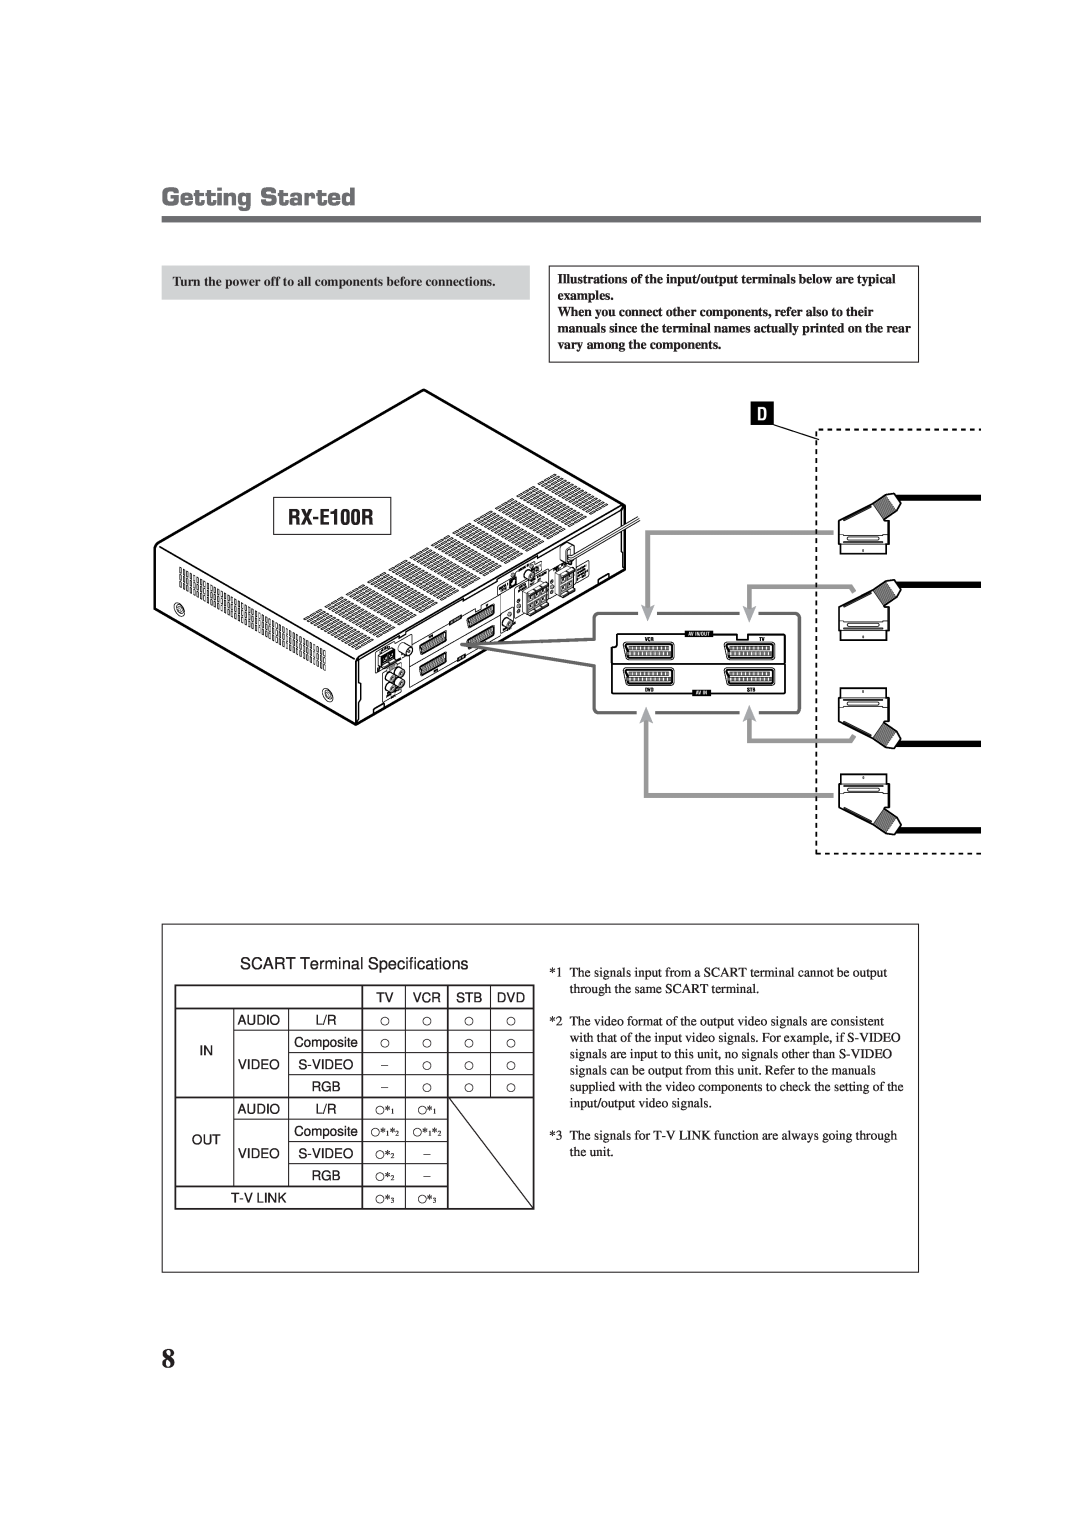 JVC RX-E100RSL manual SCART Terminal Specifications, Getting Started 